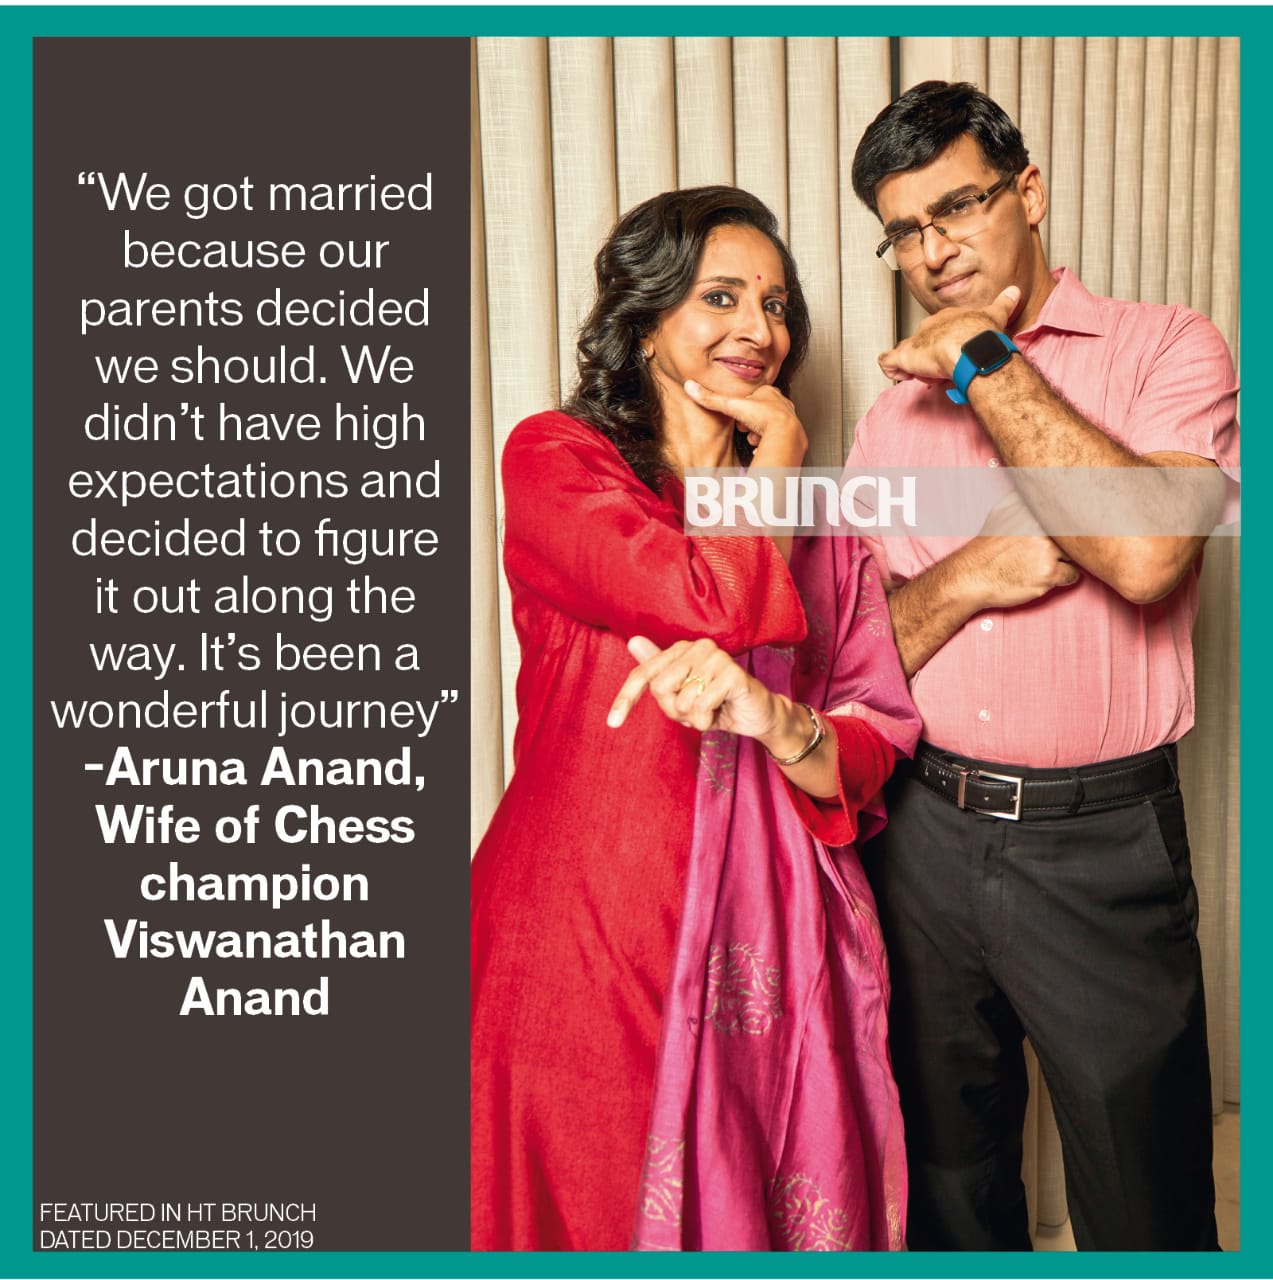 HT Brunch on X: His Queen, My King! 23 years after marriage, Aruna and Viswanathan  Anand hold forth on what makes them the tightest of teams. #Checkmates  #brunchcoverstory #brunchexclusive #checkmates #powercouple  #viswanathananand #